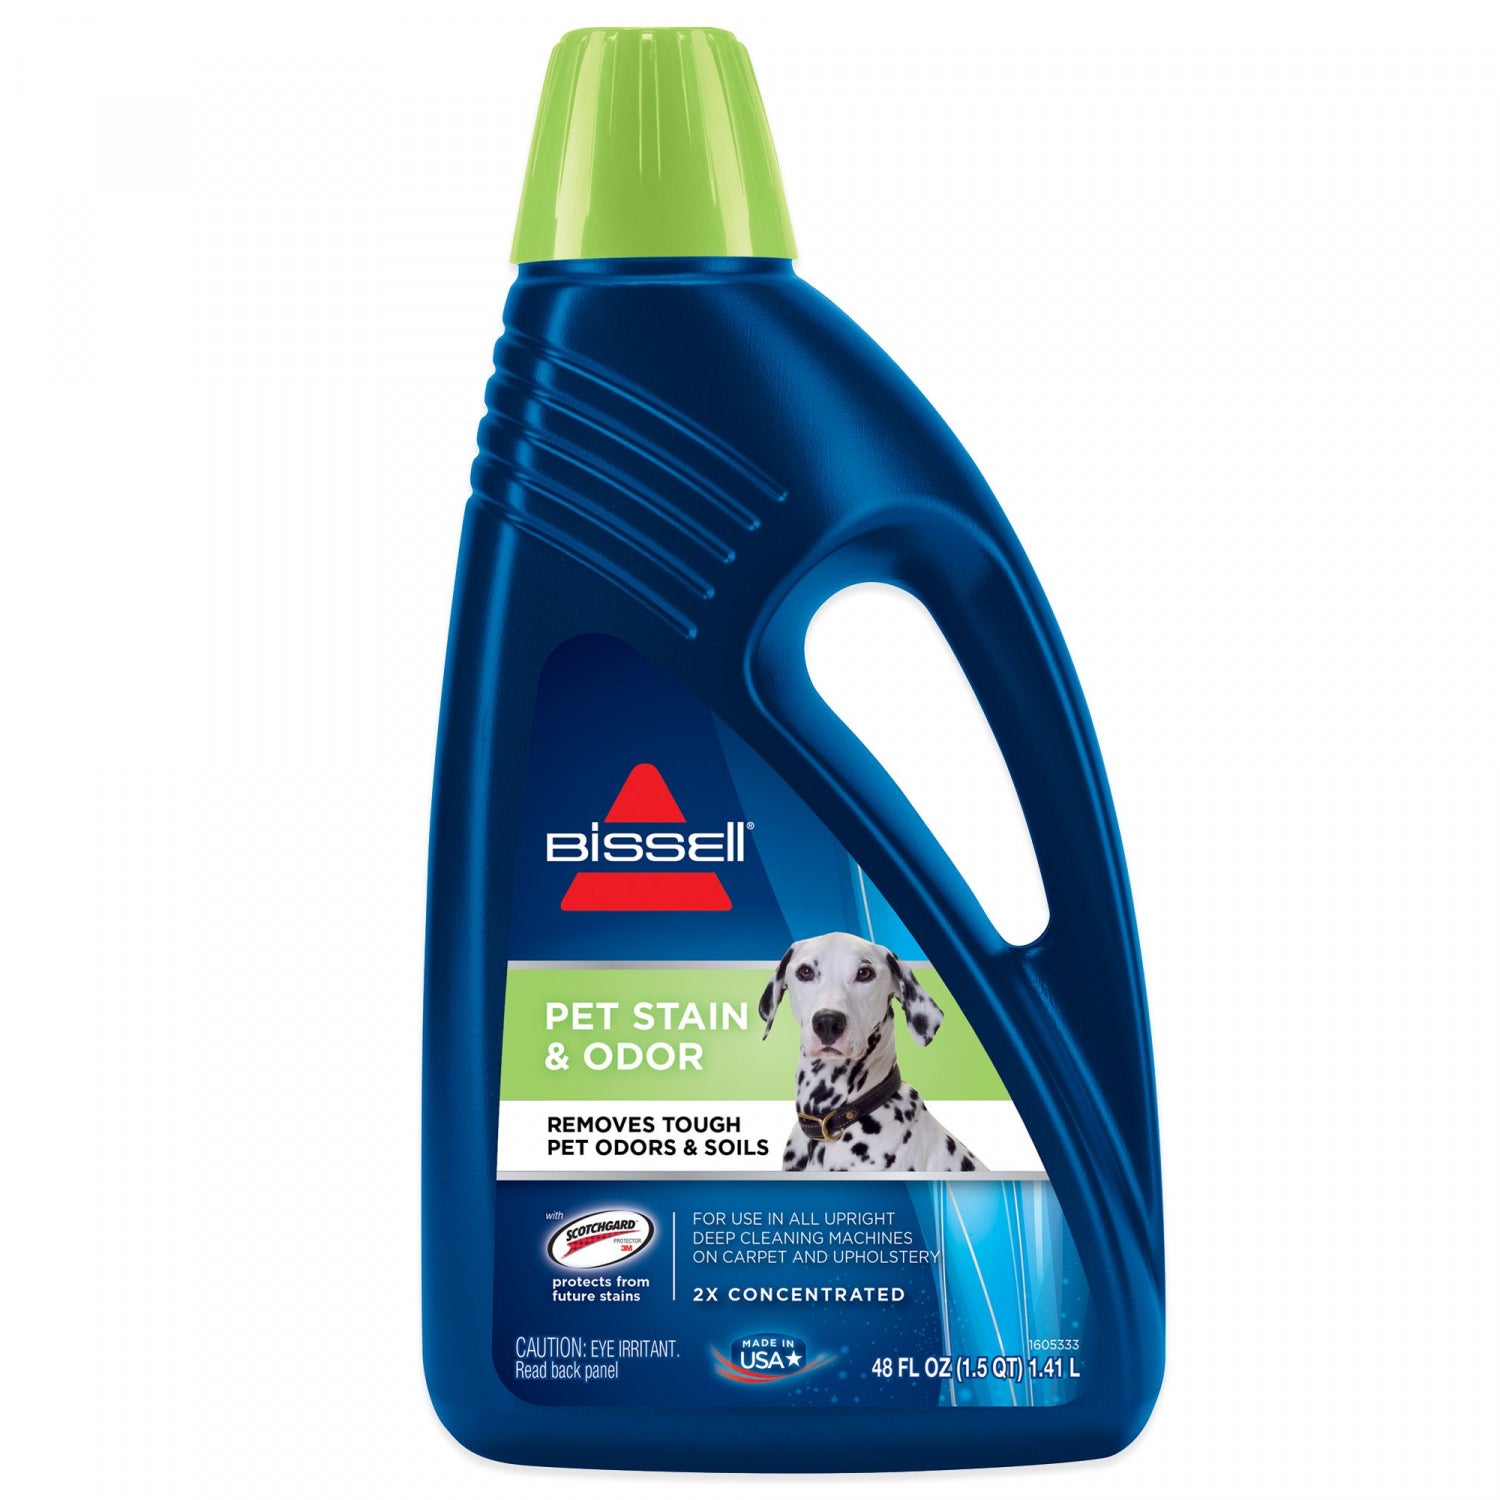 BISSELL 2X Pet Stain and Odor Formula | MrOrganic Store